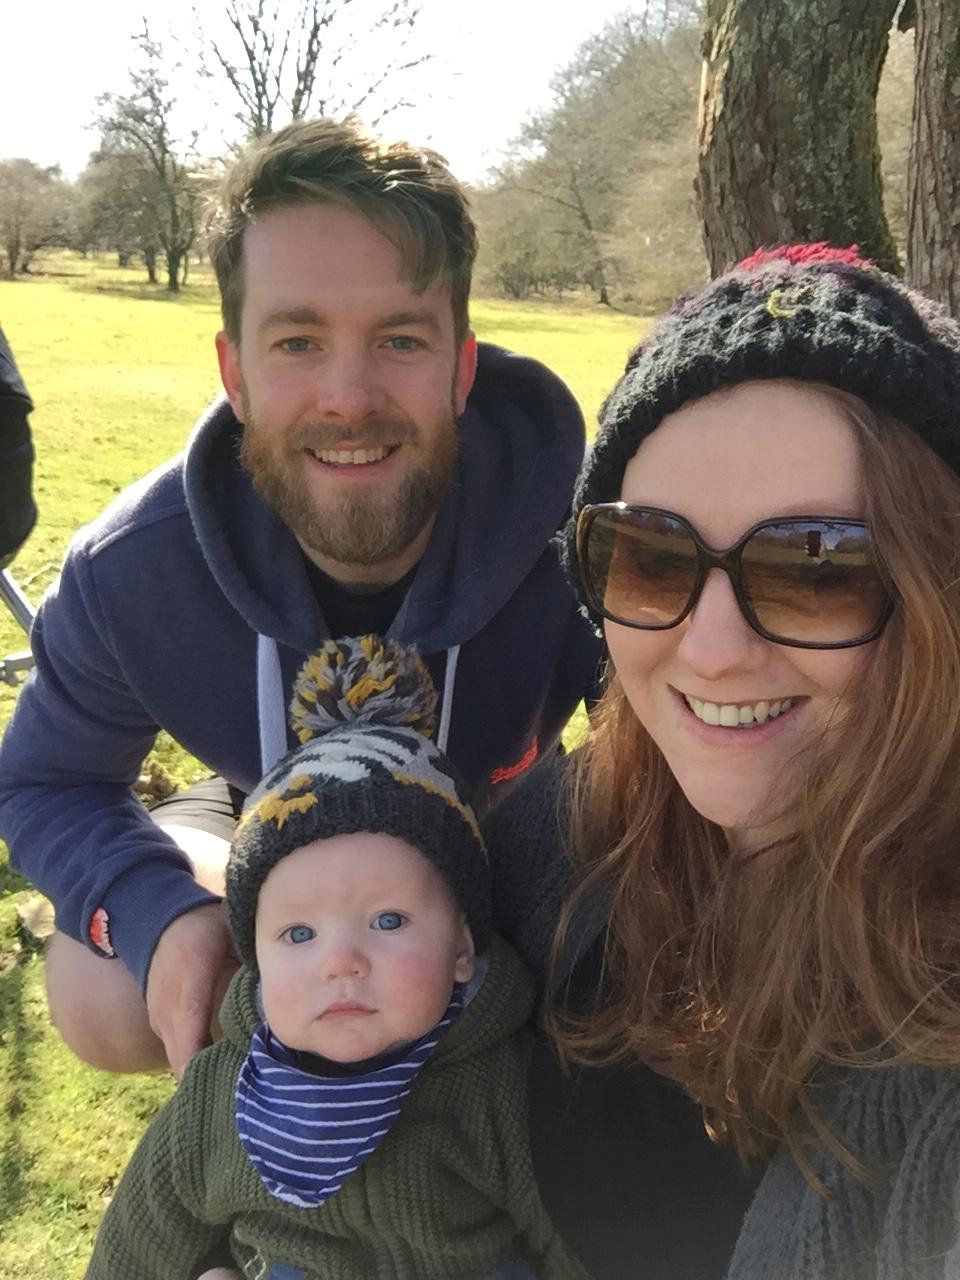 Jon Parsons, 30, and Kathryn Rowlands, 29, with Alexander Parsons  